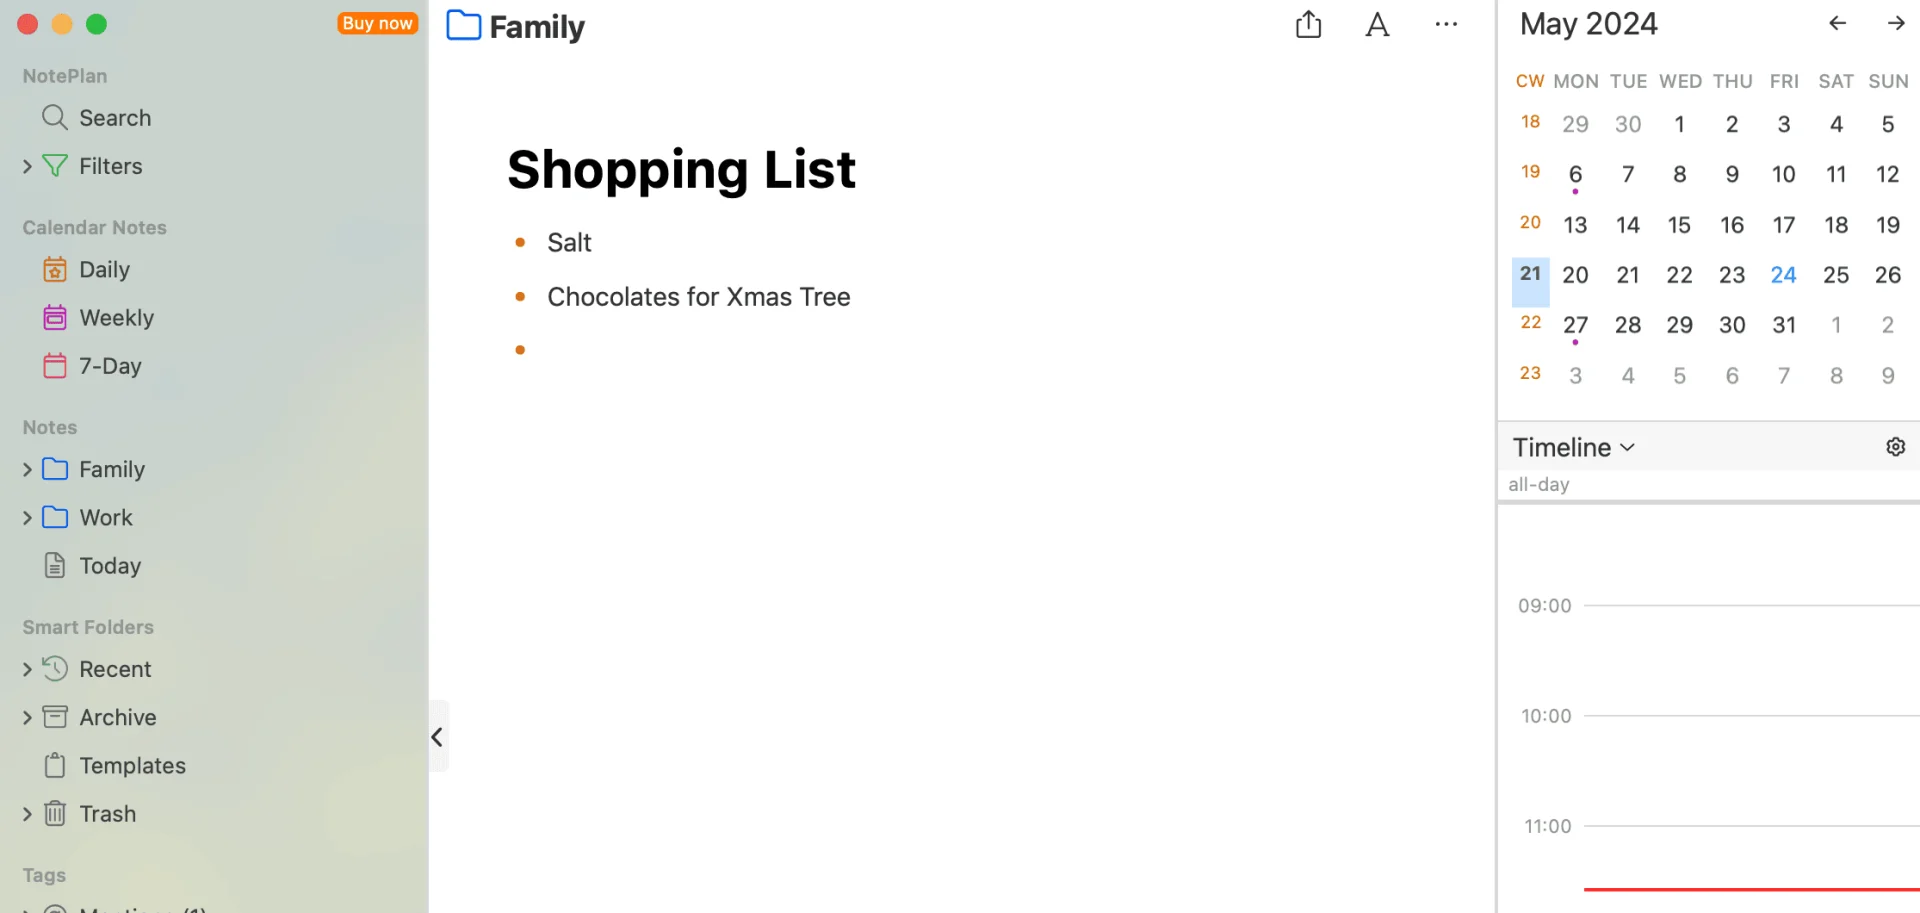 Shopping List in NotePlan